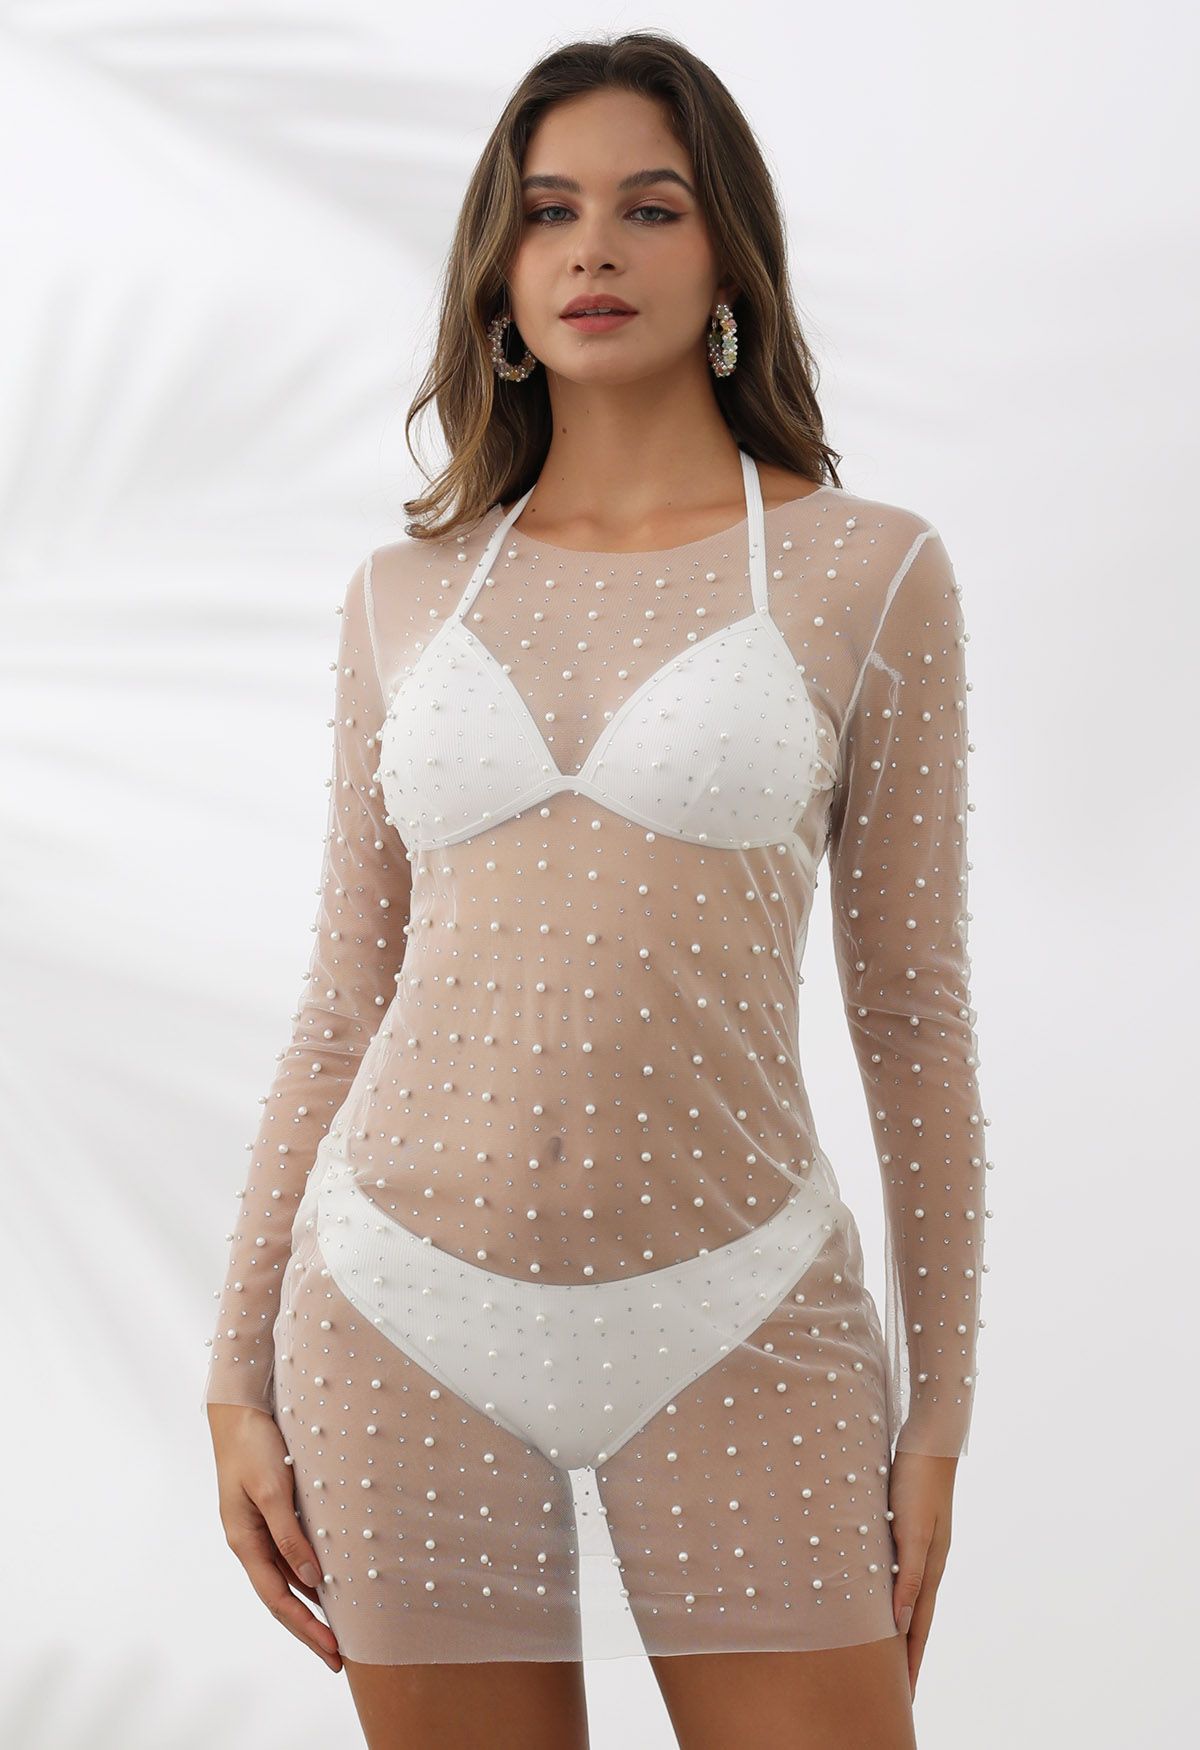 Full Pearl Embellished Sheer Mesh Cover-Up Dress in White